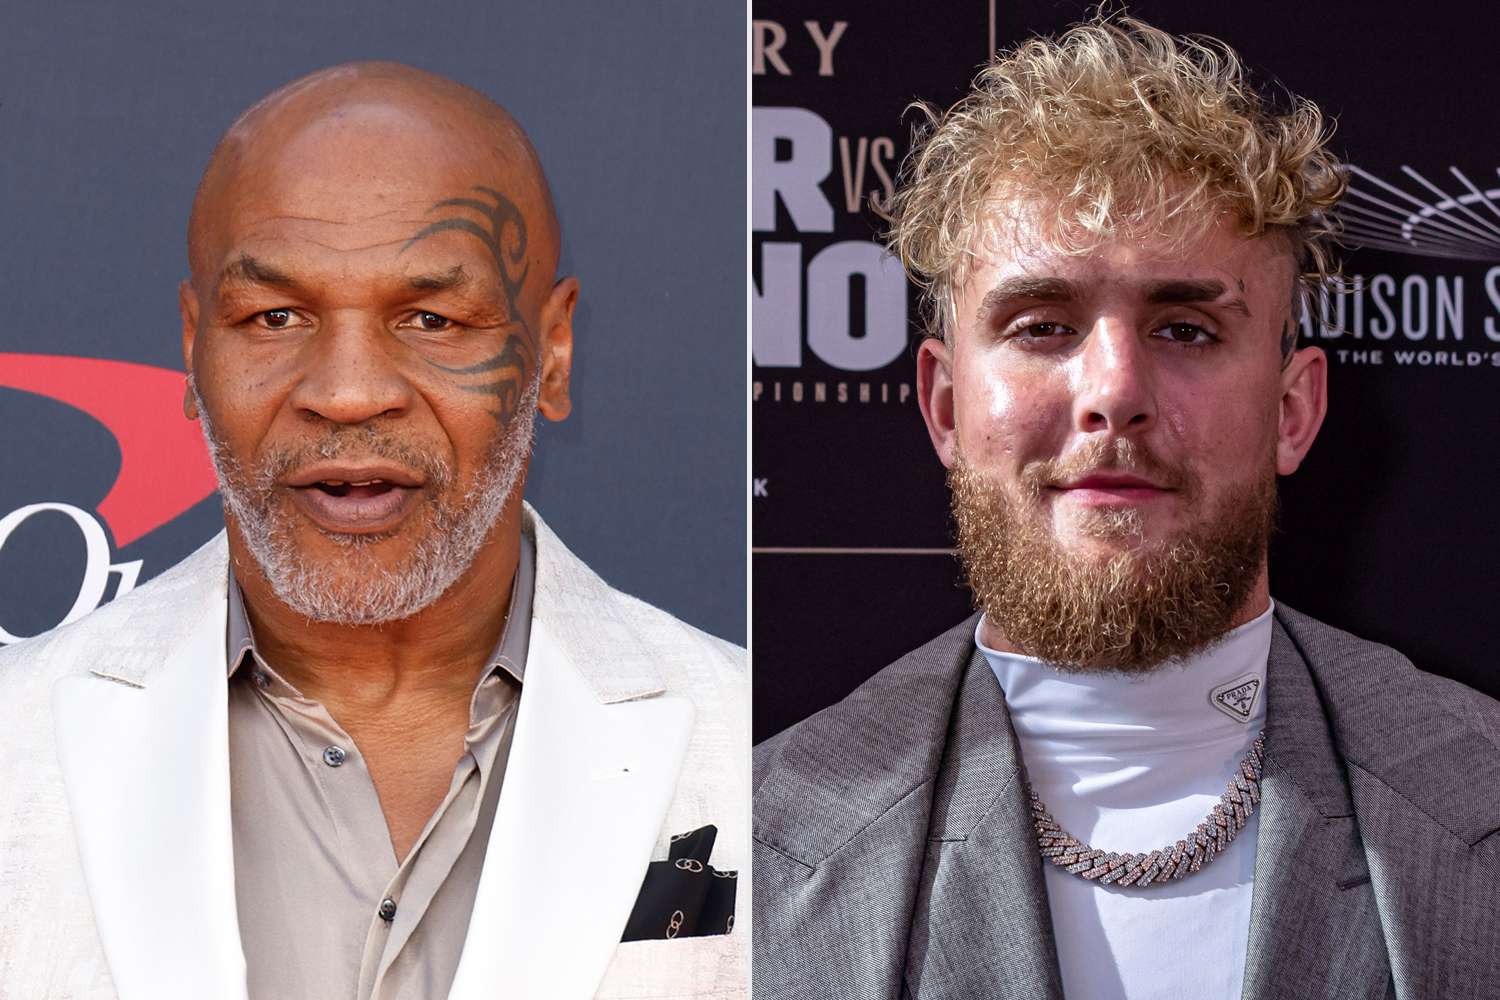 Mike Tyson's Boxing Match with Jake Paul Rescheduled After Ulcer Flare-Up: 'Thankful to the Medical Staff That Treated Me'